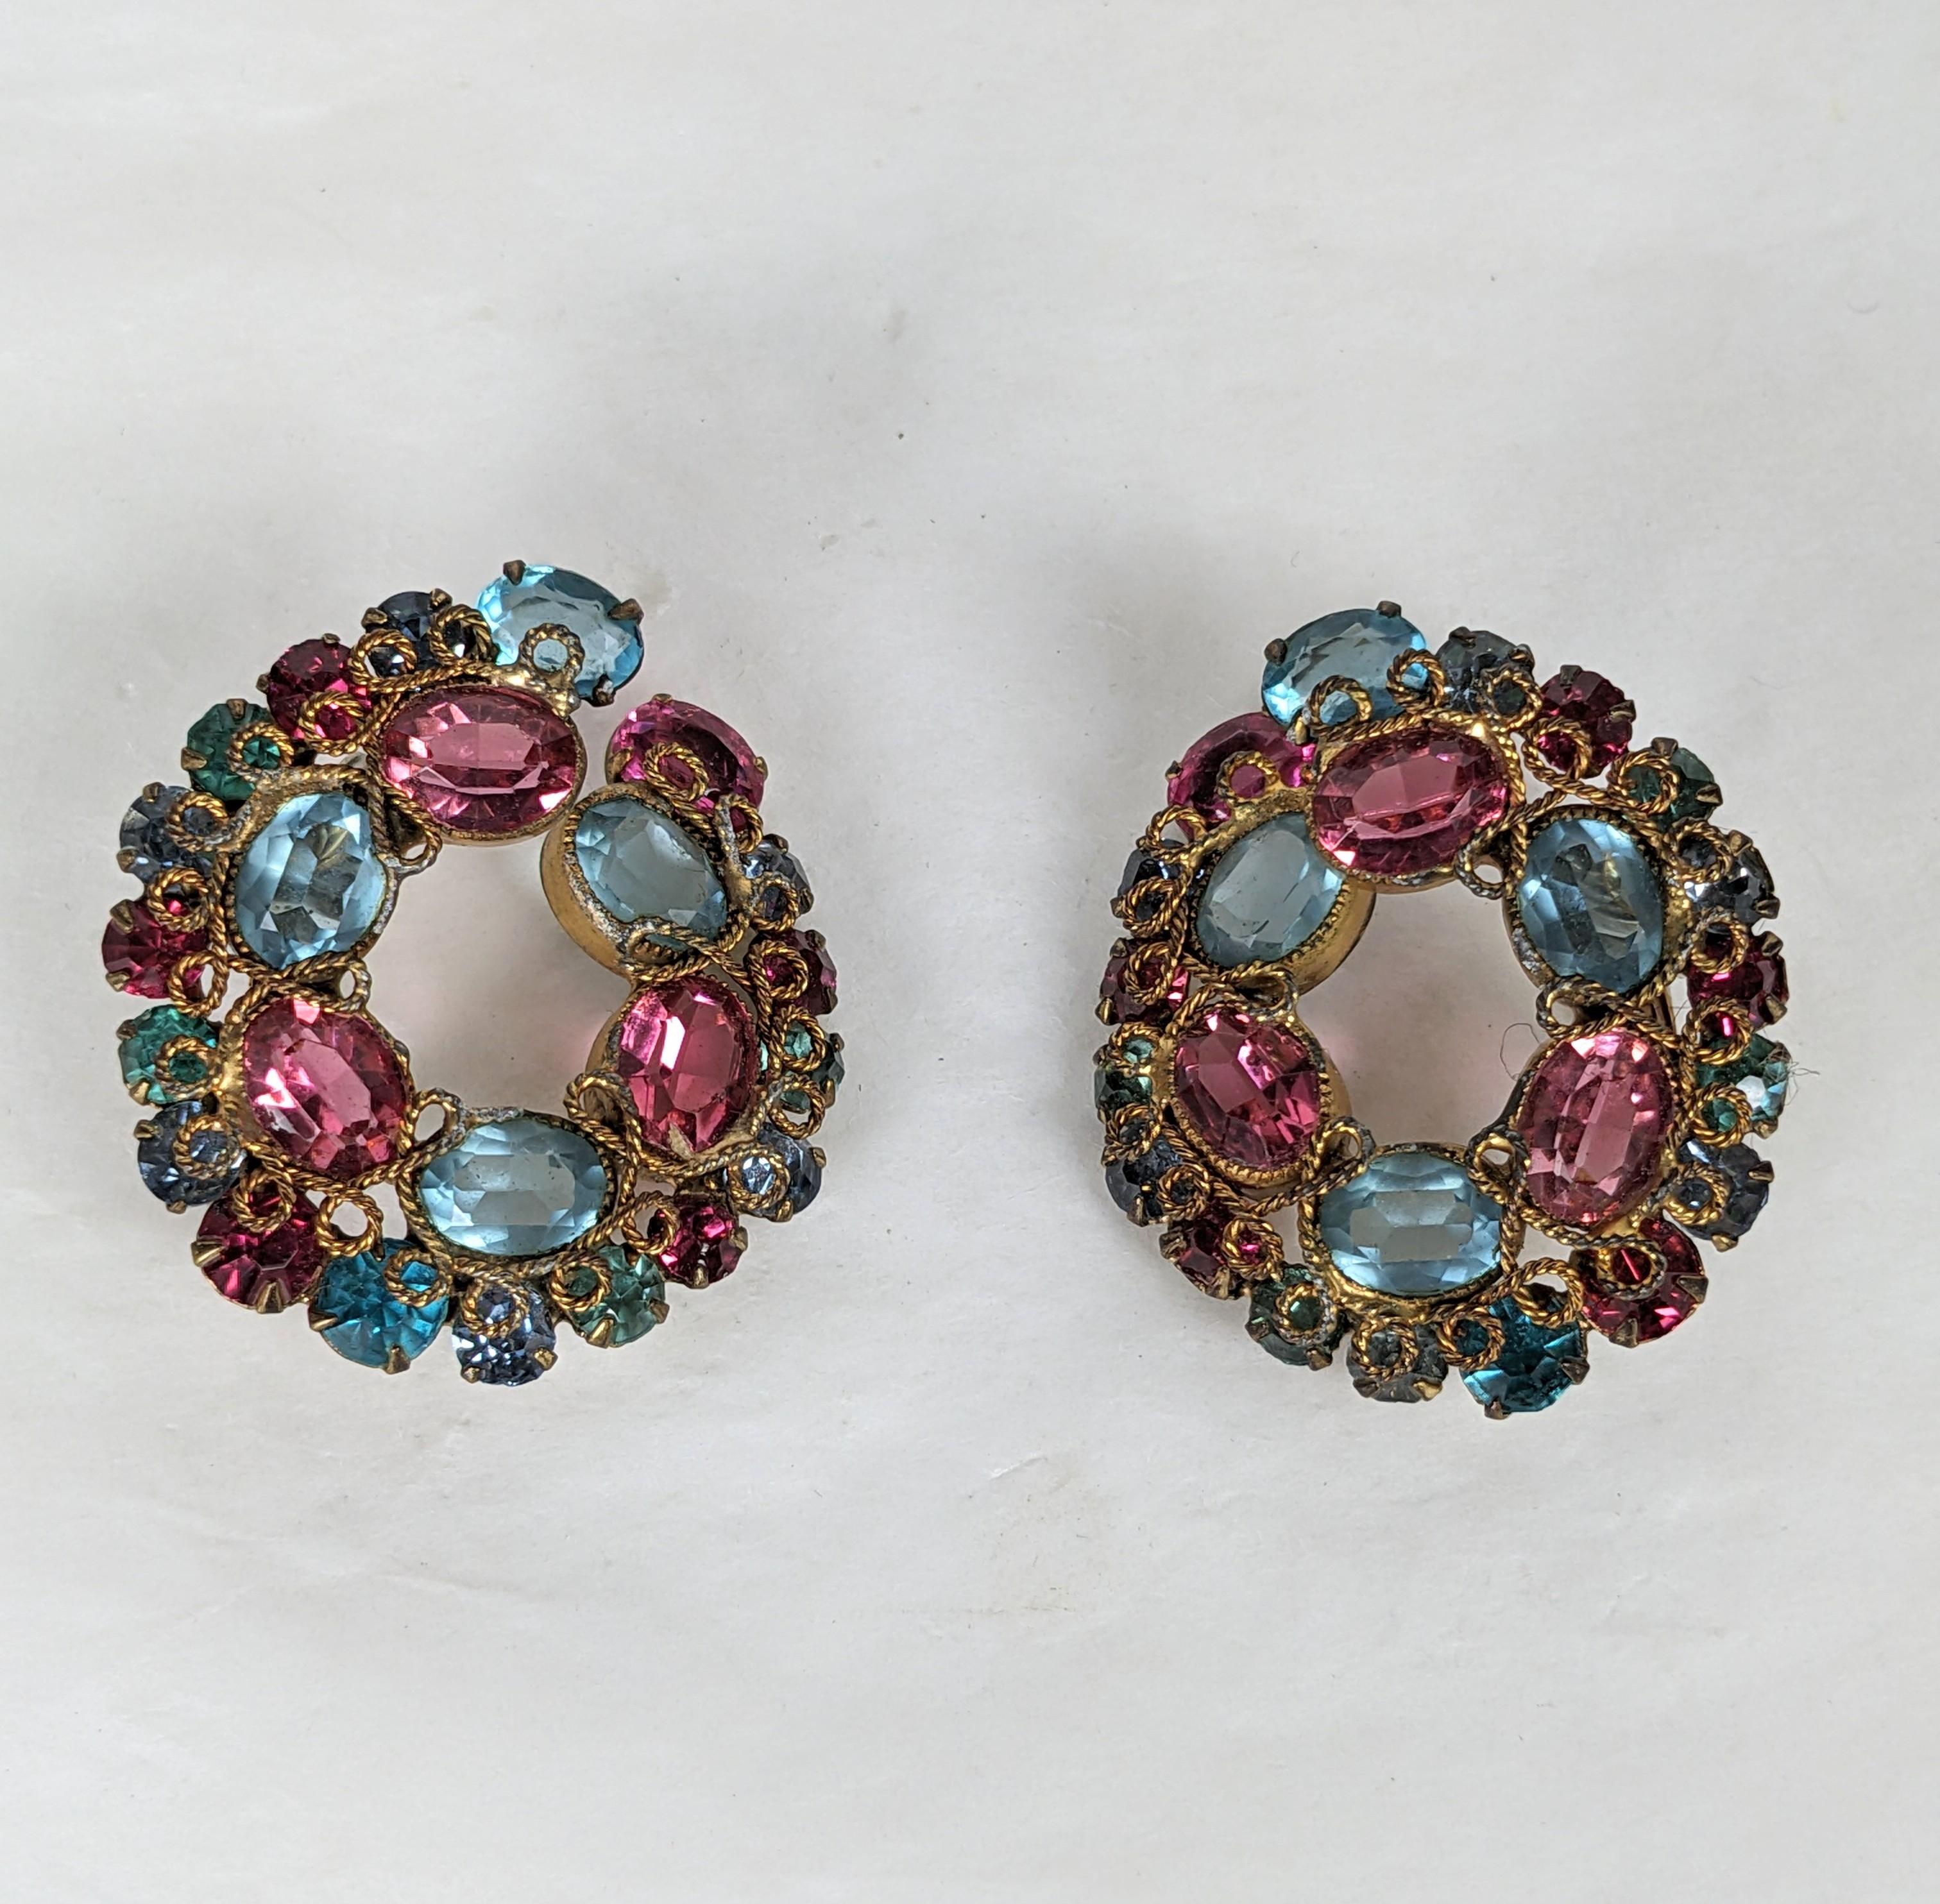 Robert Pastel Crystal Earrings, handmade of pink and aqua crystals with signature looped wirework decoration. Clip back fittings. 1.25